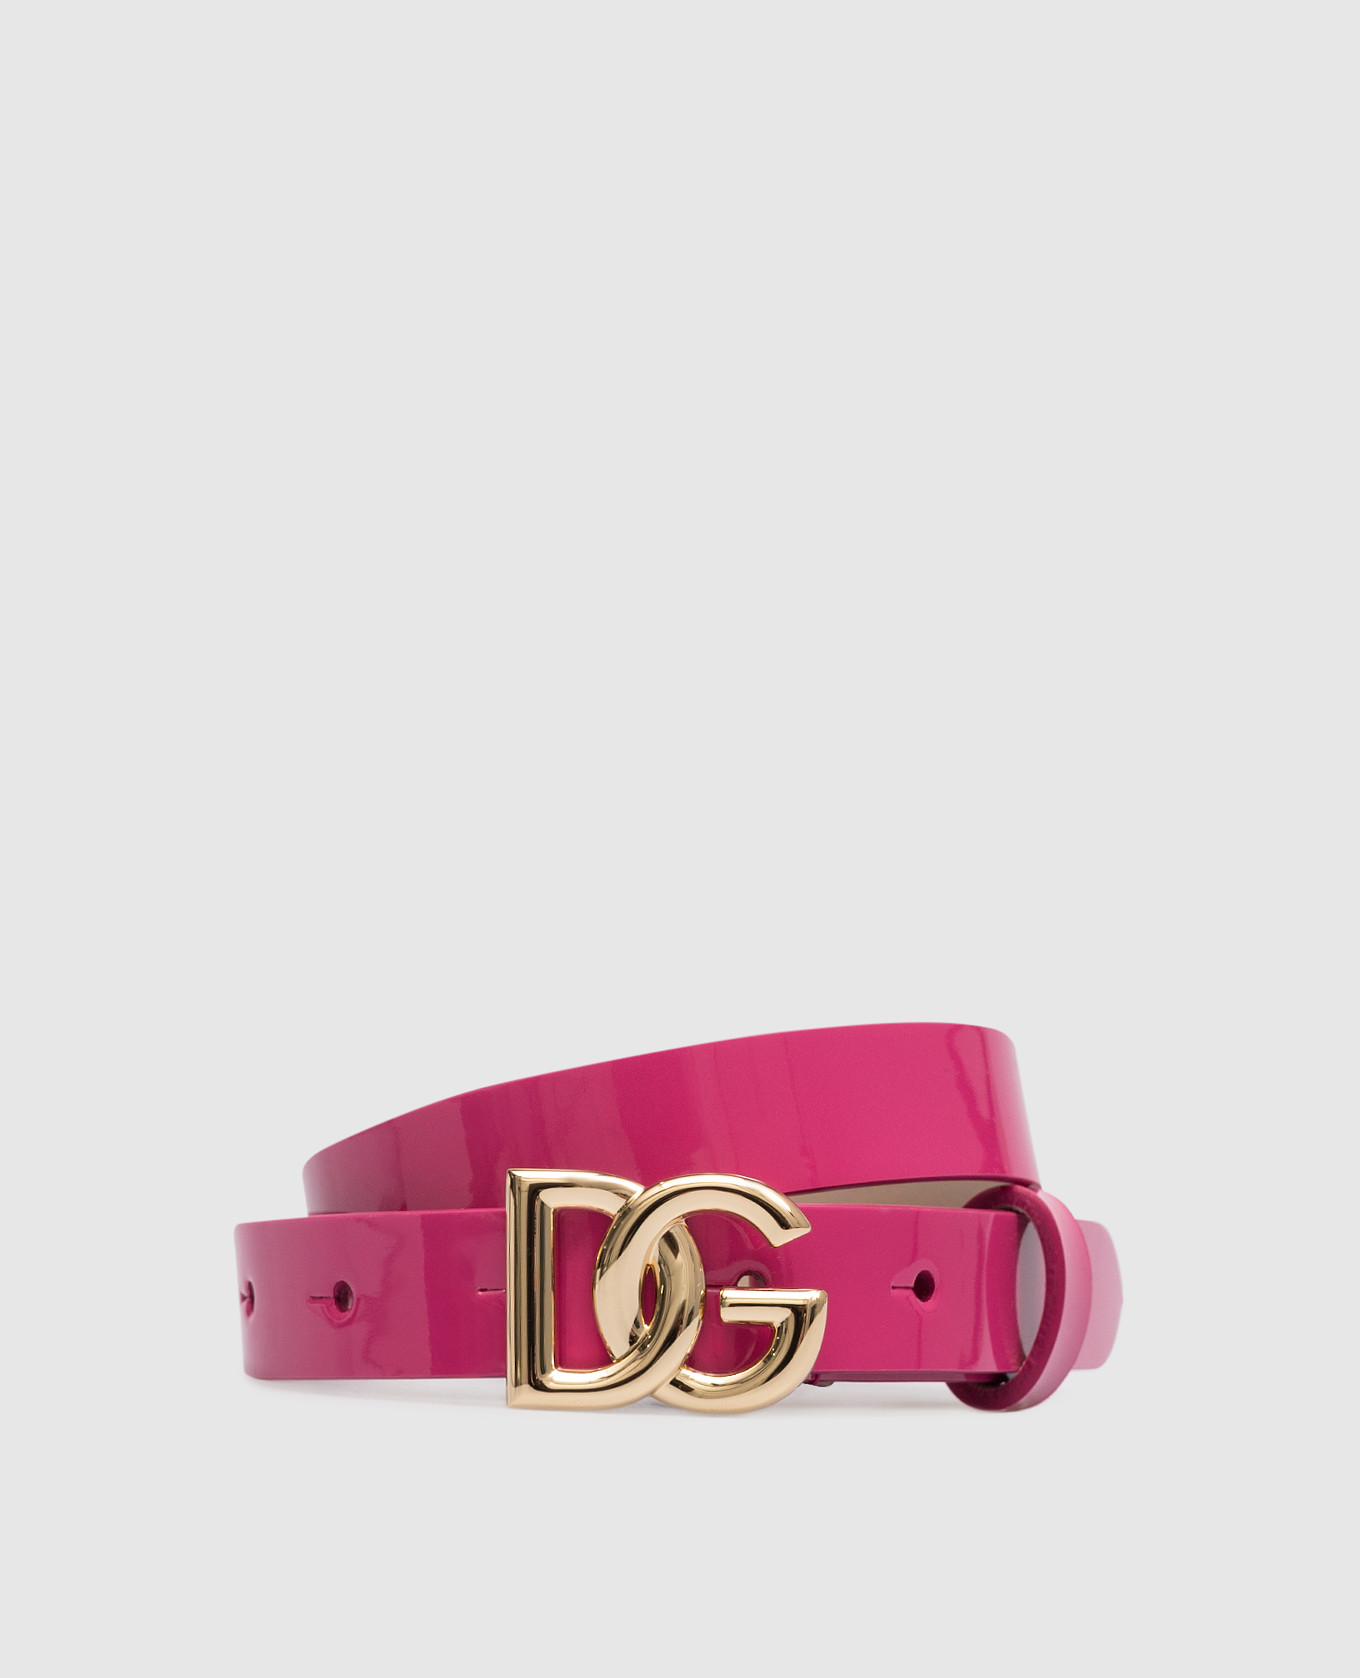 Baby pink patent leather belt with DG logo